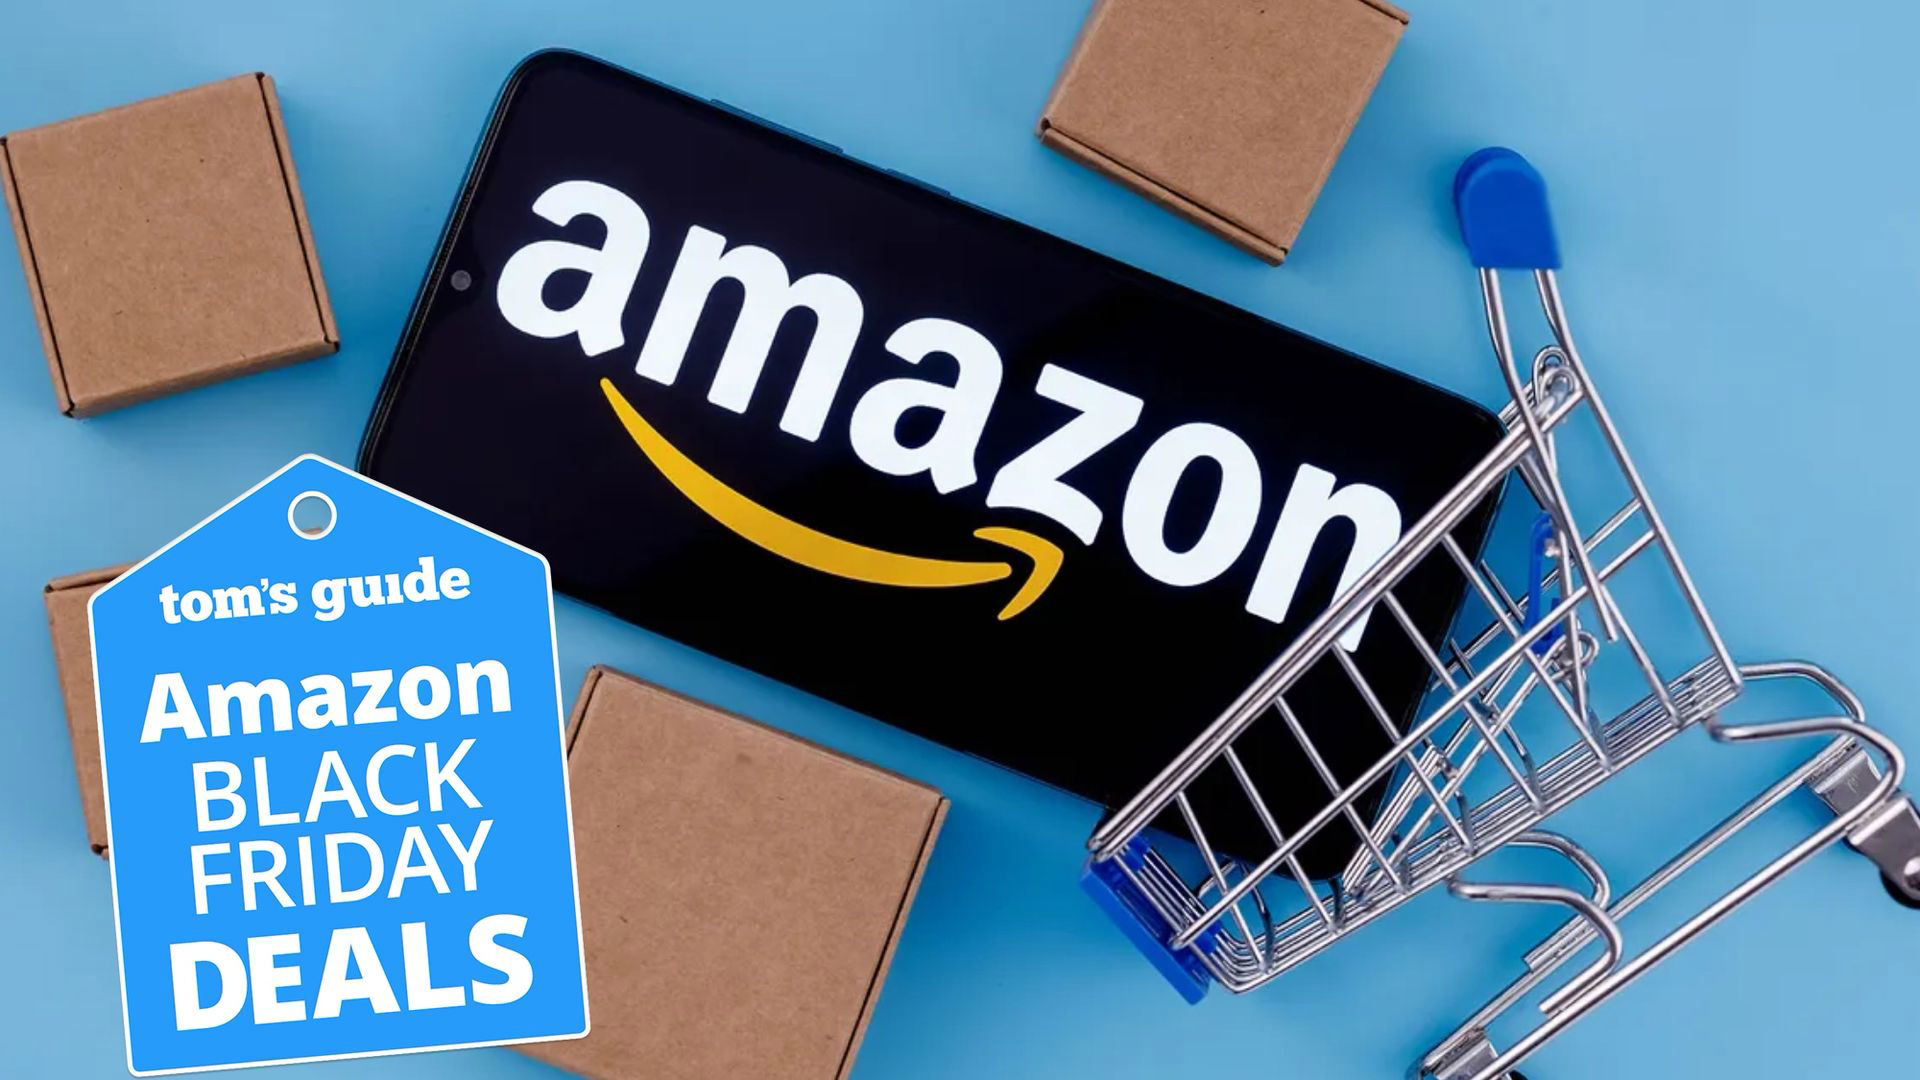 Amazon early Black Friday sale — 17 deals I’d buy right now